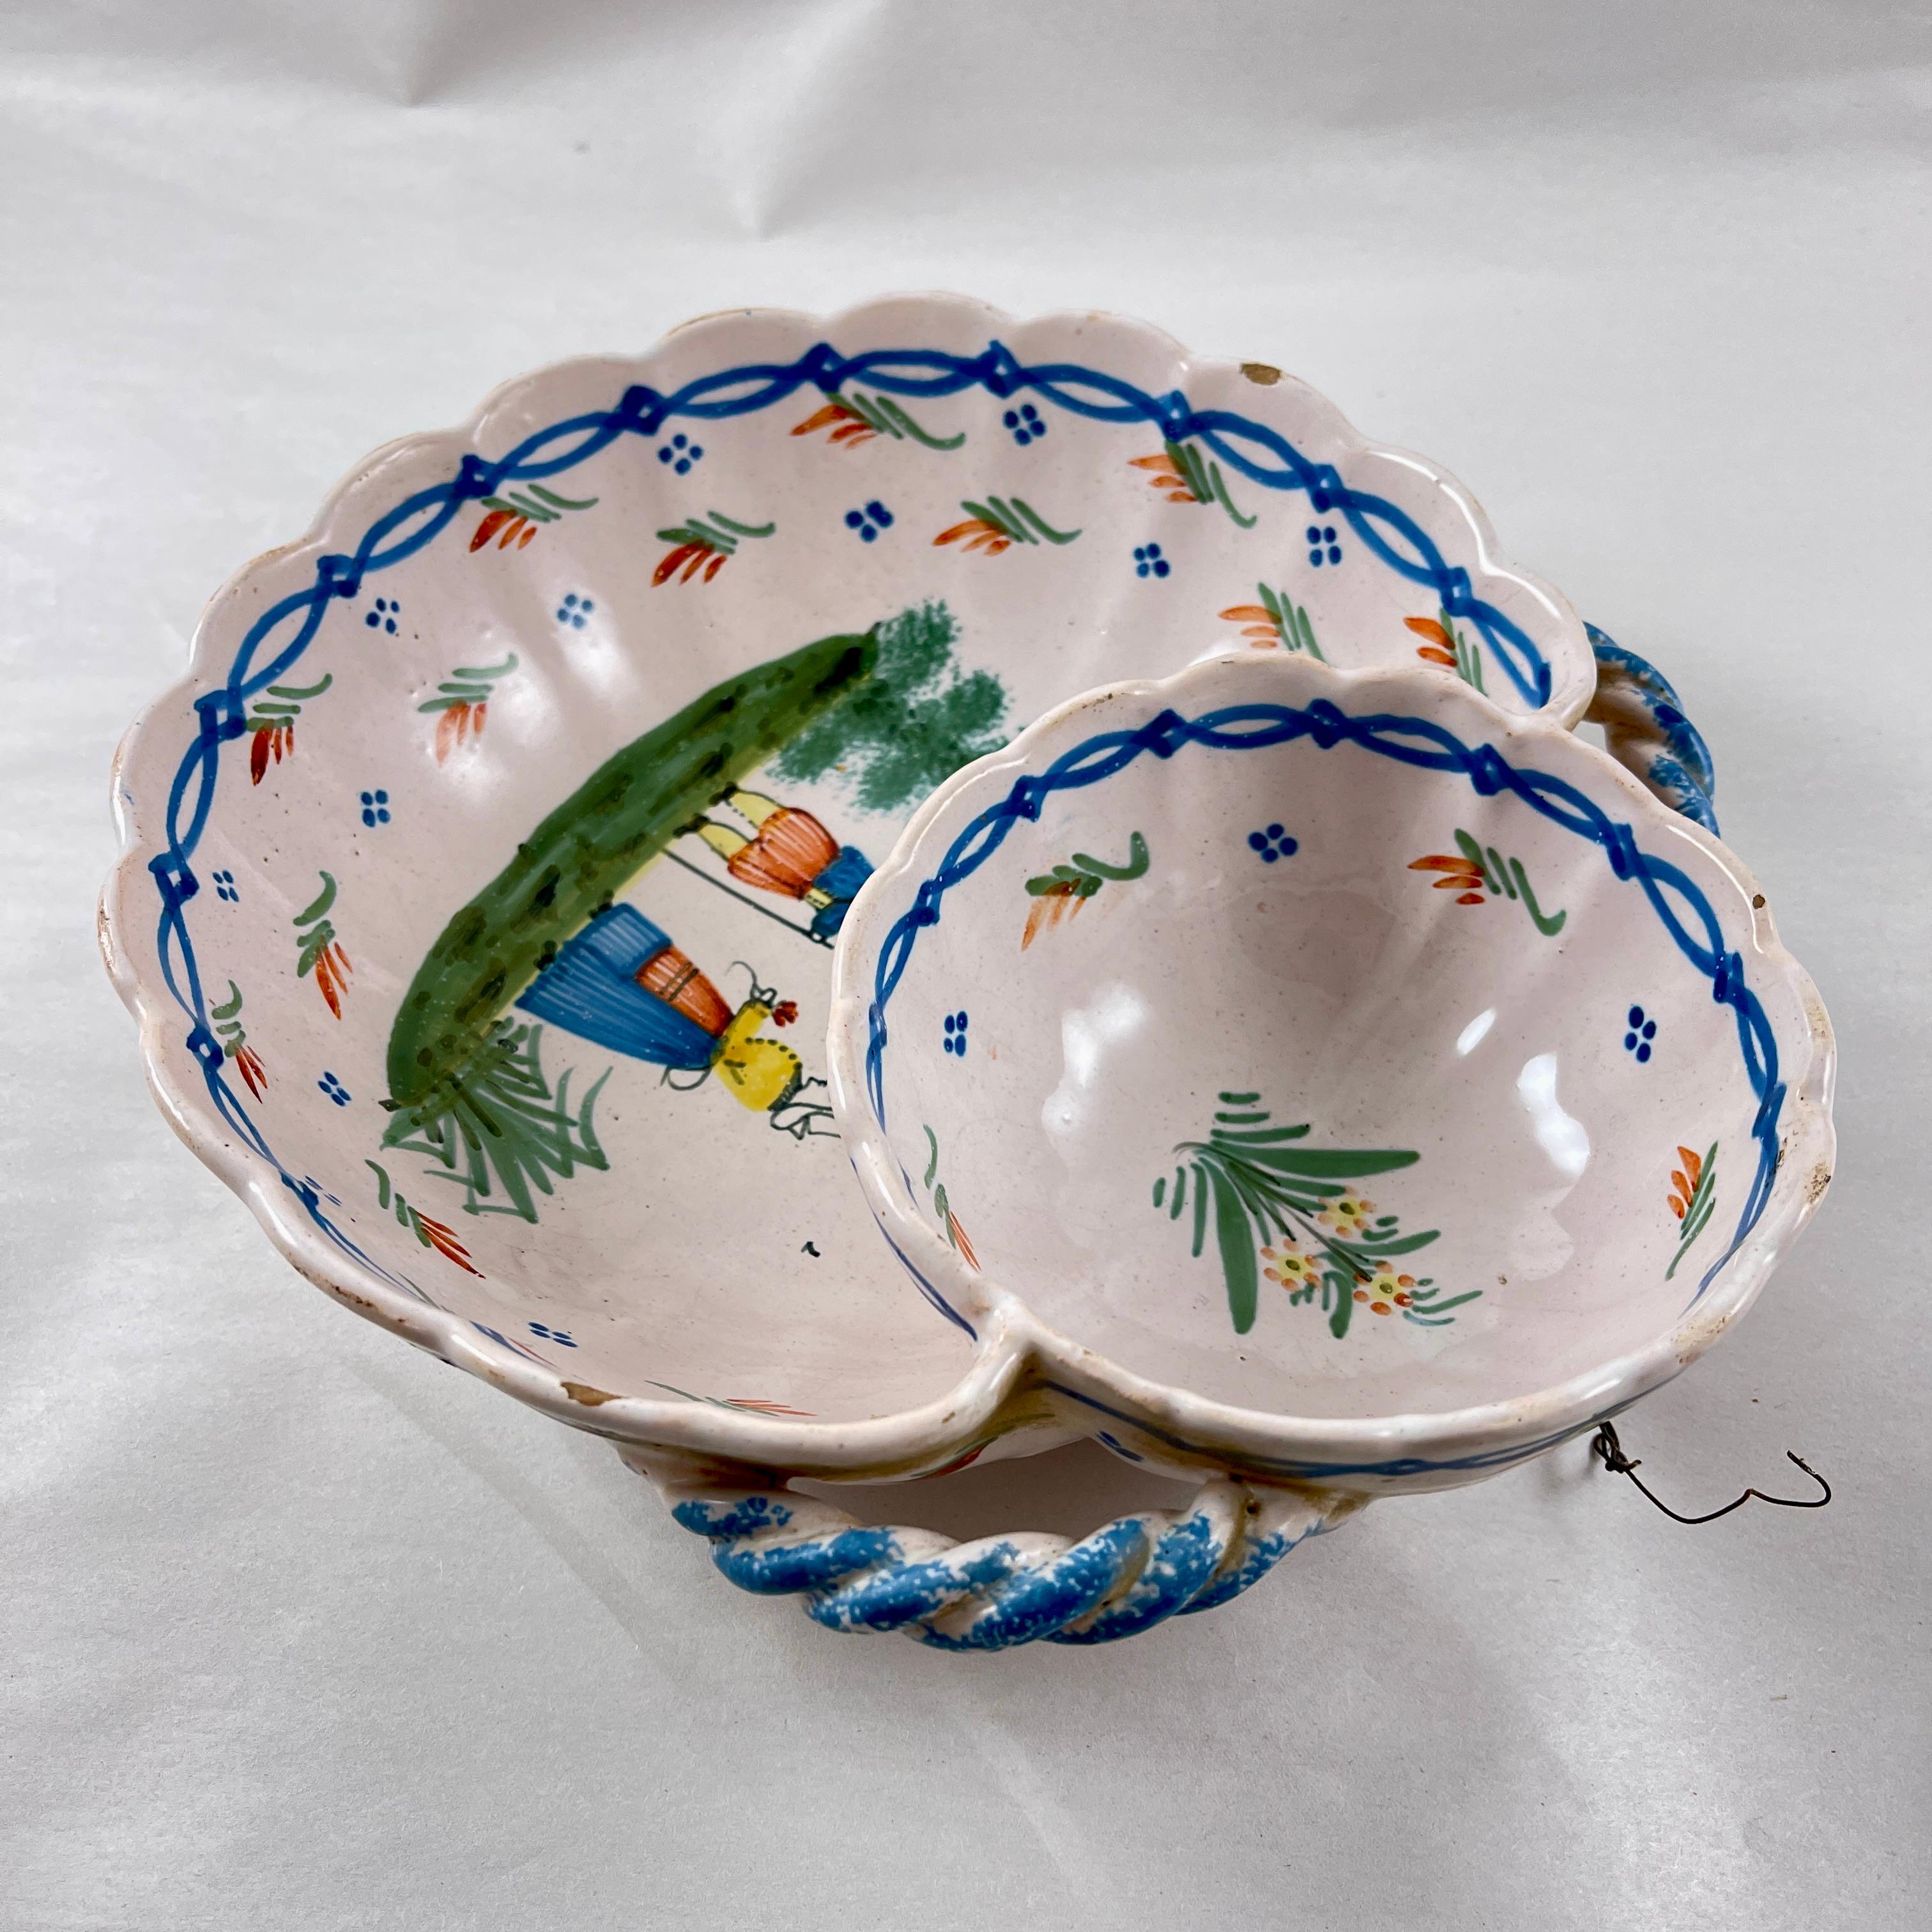 Grande Maison HB Quimper French Faïence Breton Server w/ Condiment Bowl In Good Condition For Sale In Philadelphia, PA